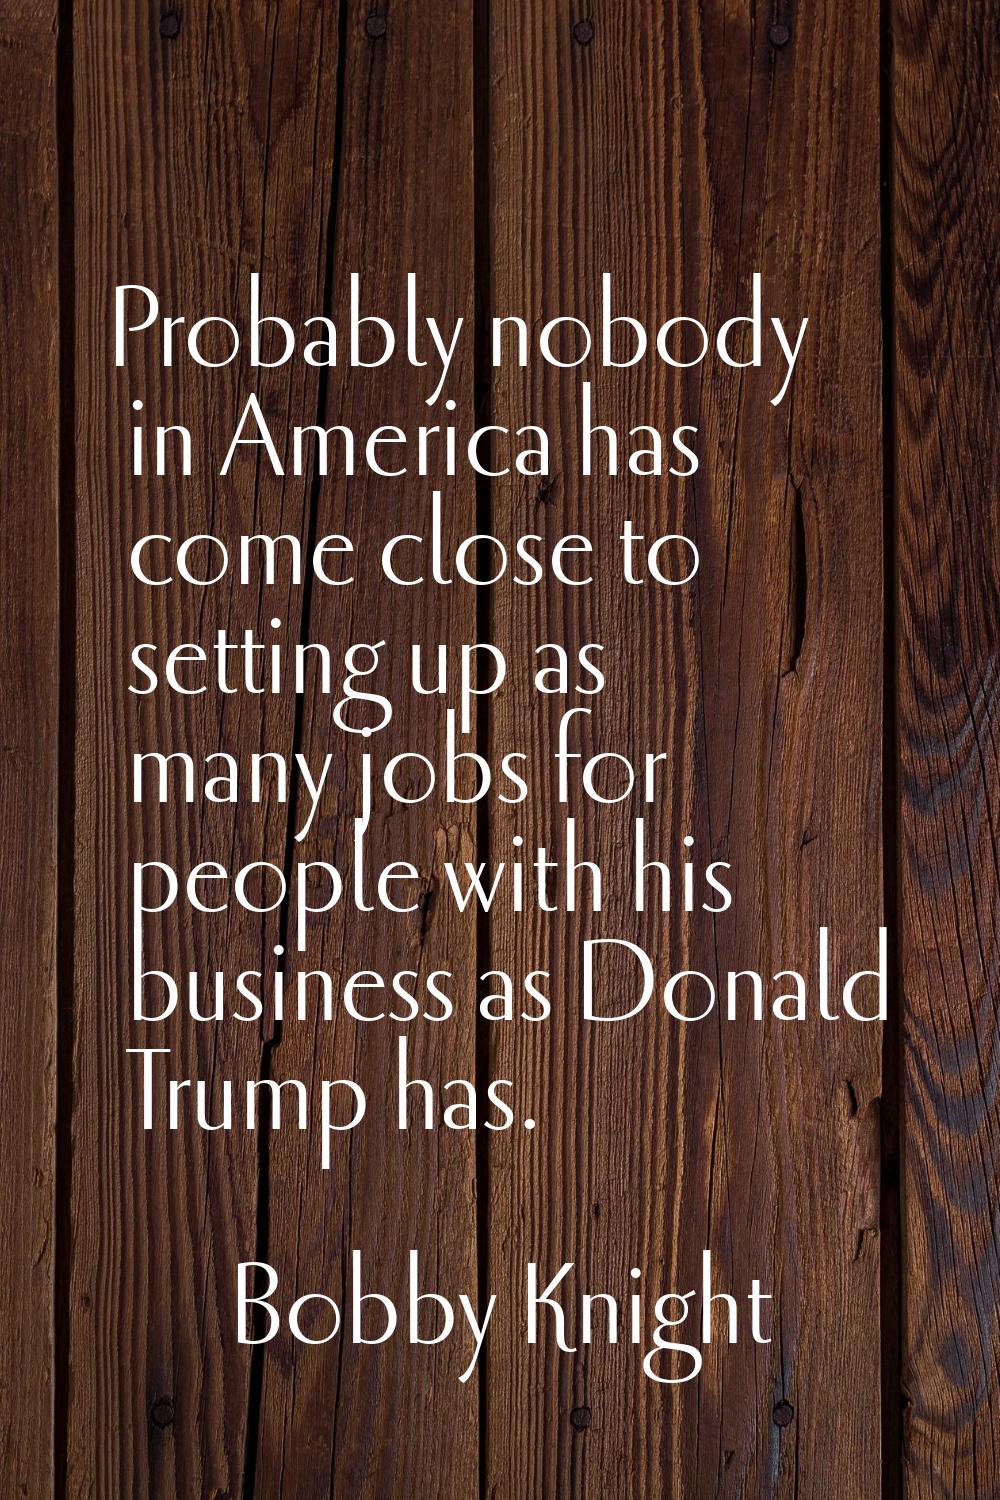 Probably nobody in America has come close to setting up as many jobs for people with his business a